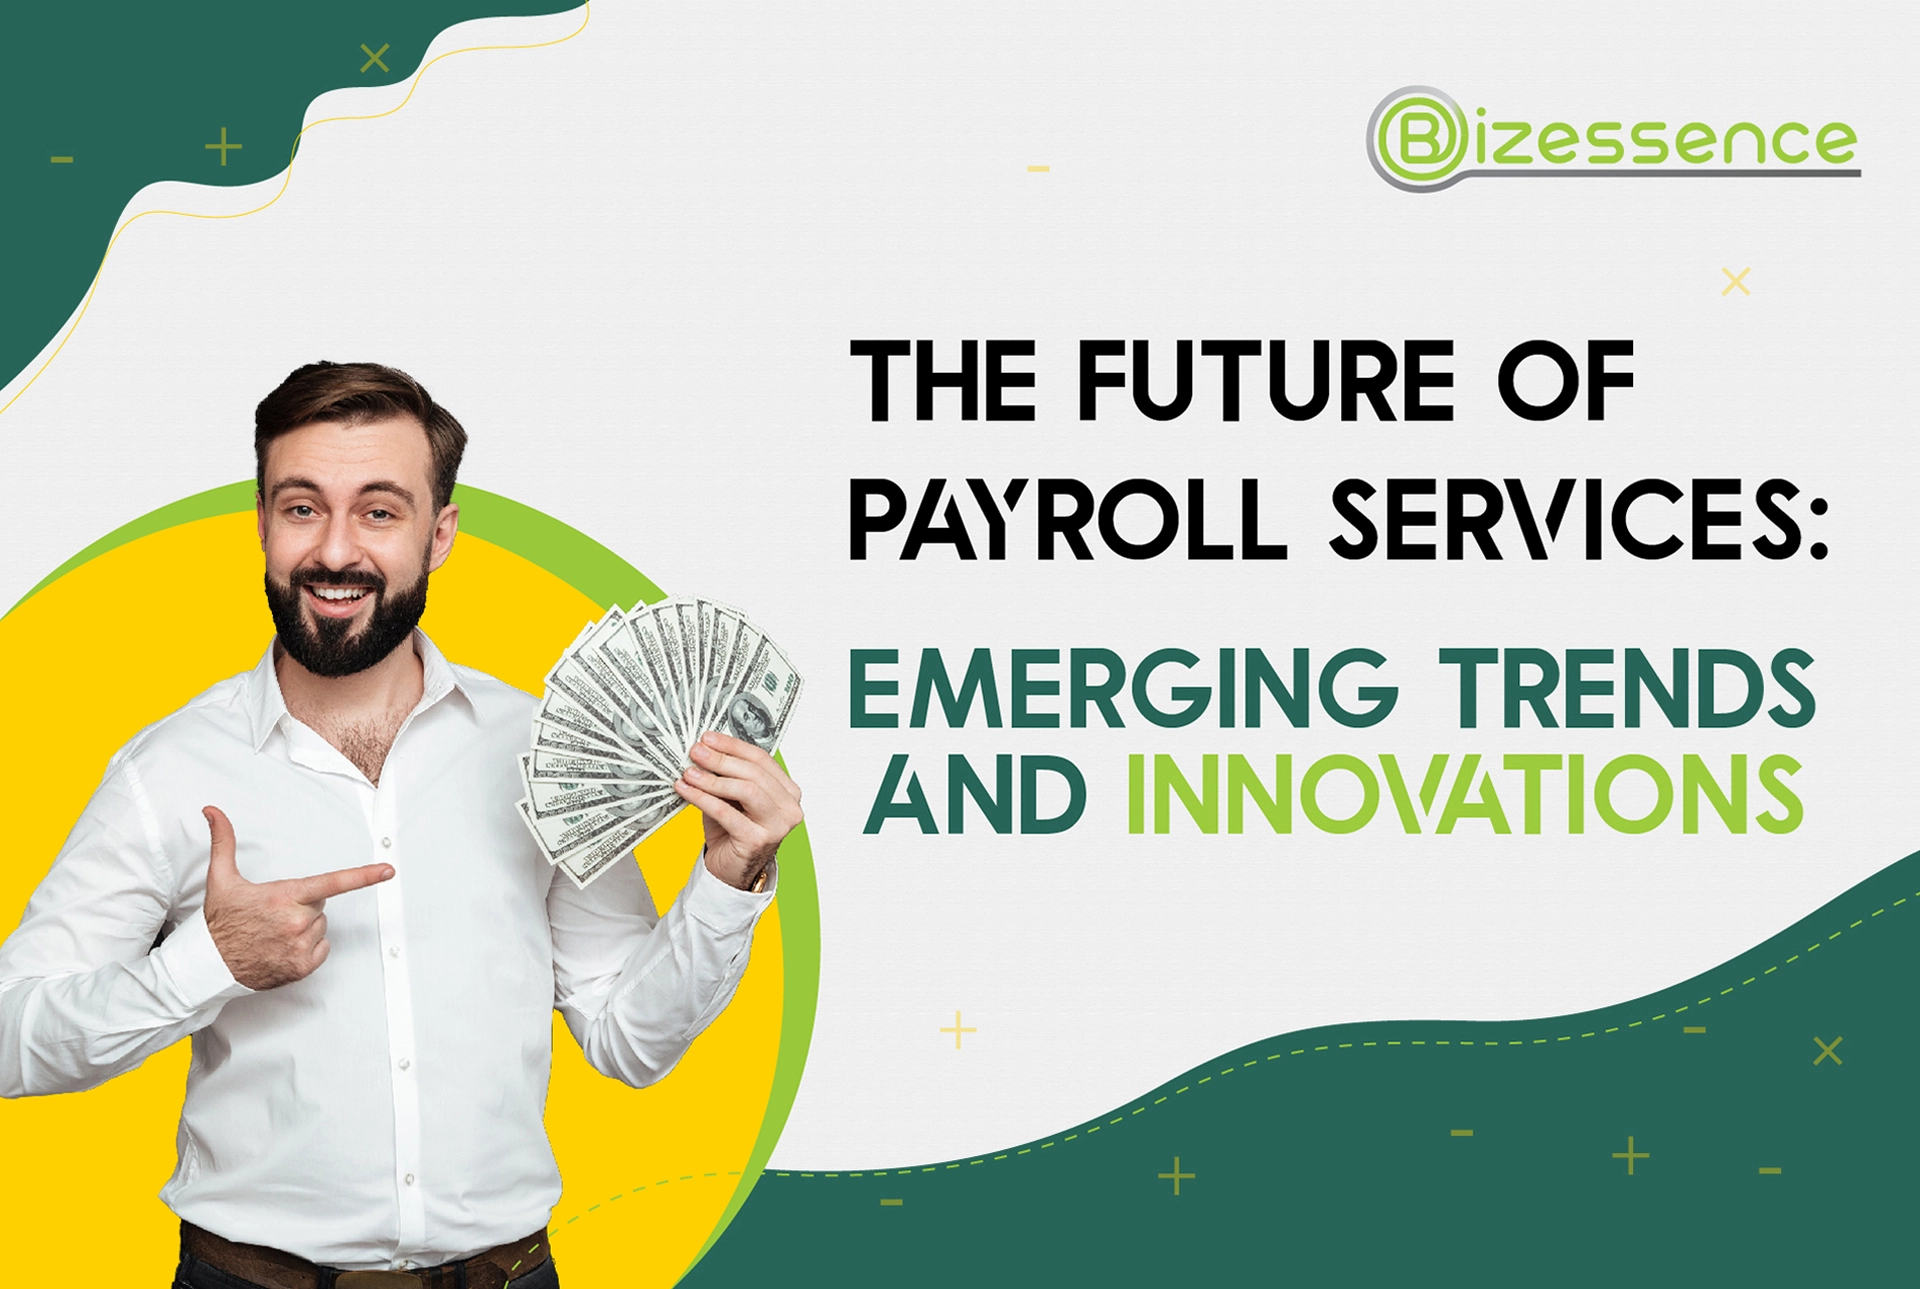 The Future of Payroll Services Emerging Trends and Innovations!